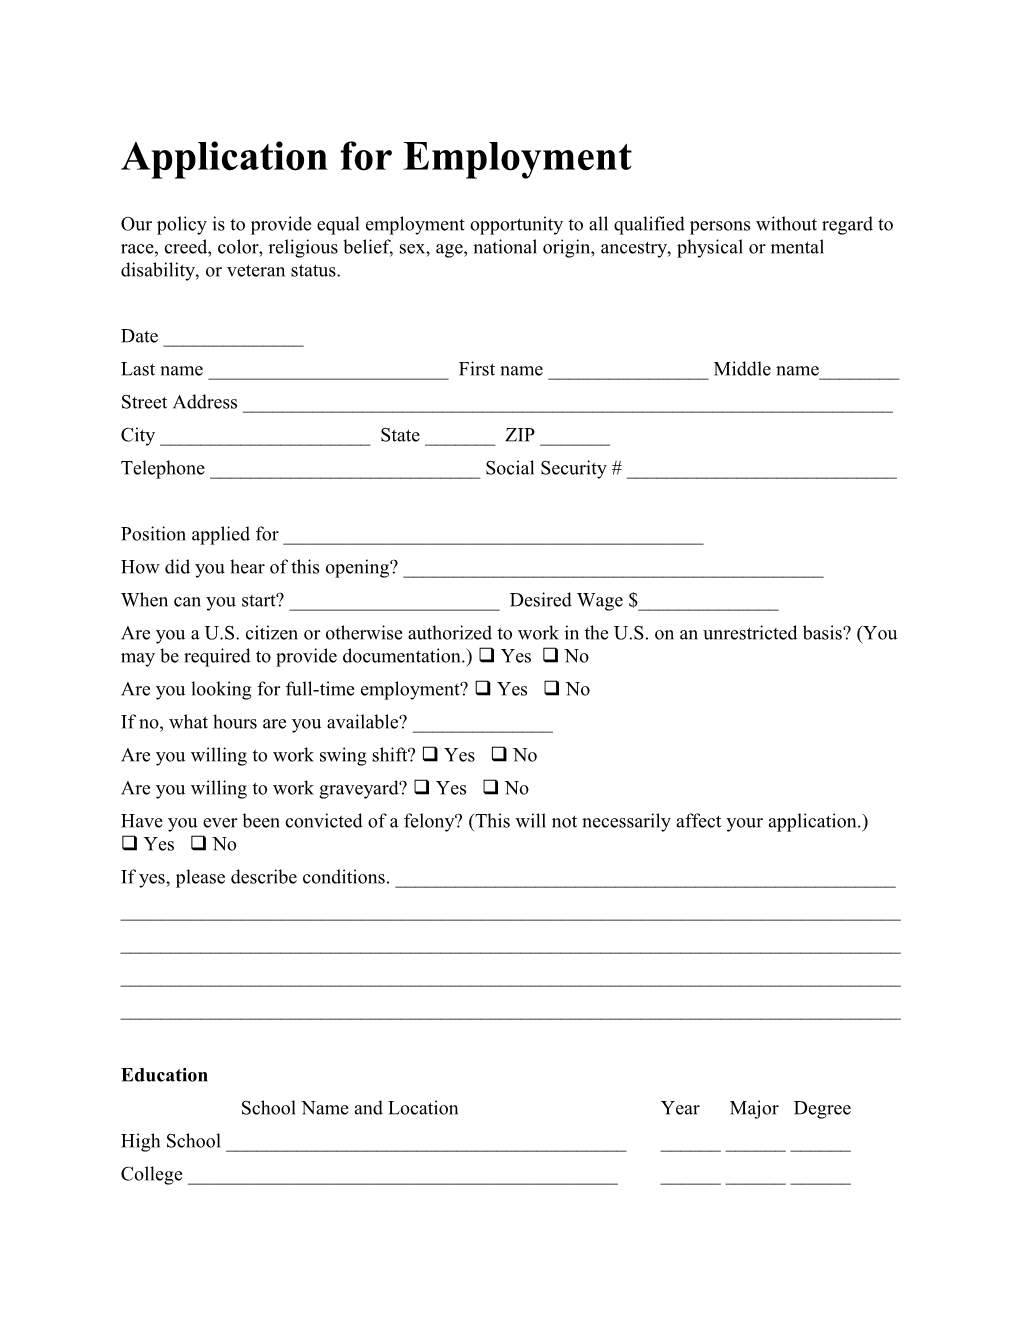 Application for Employment s63